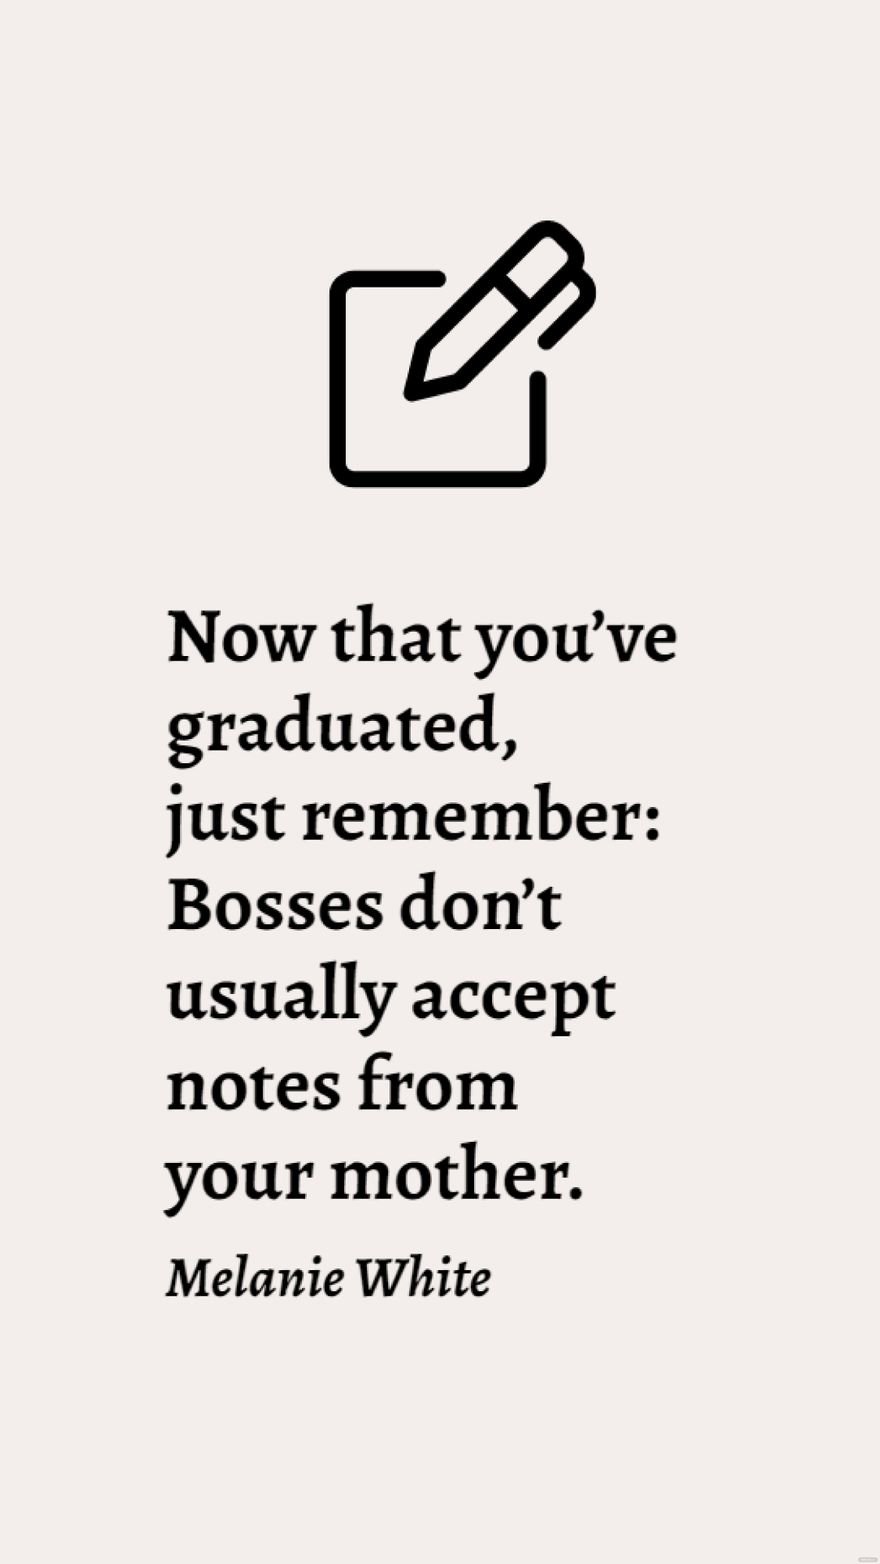 Melanie White - Now that you’ve graduated, just remember: Bosses don’t usually accept notes from your mother.